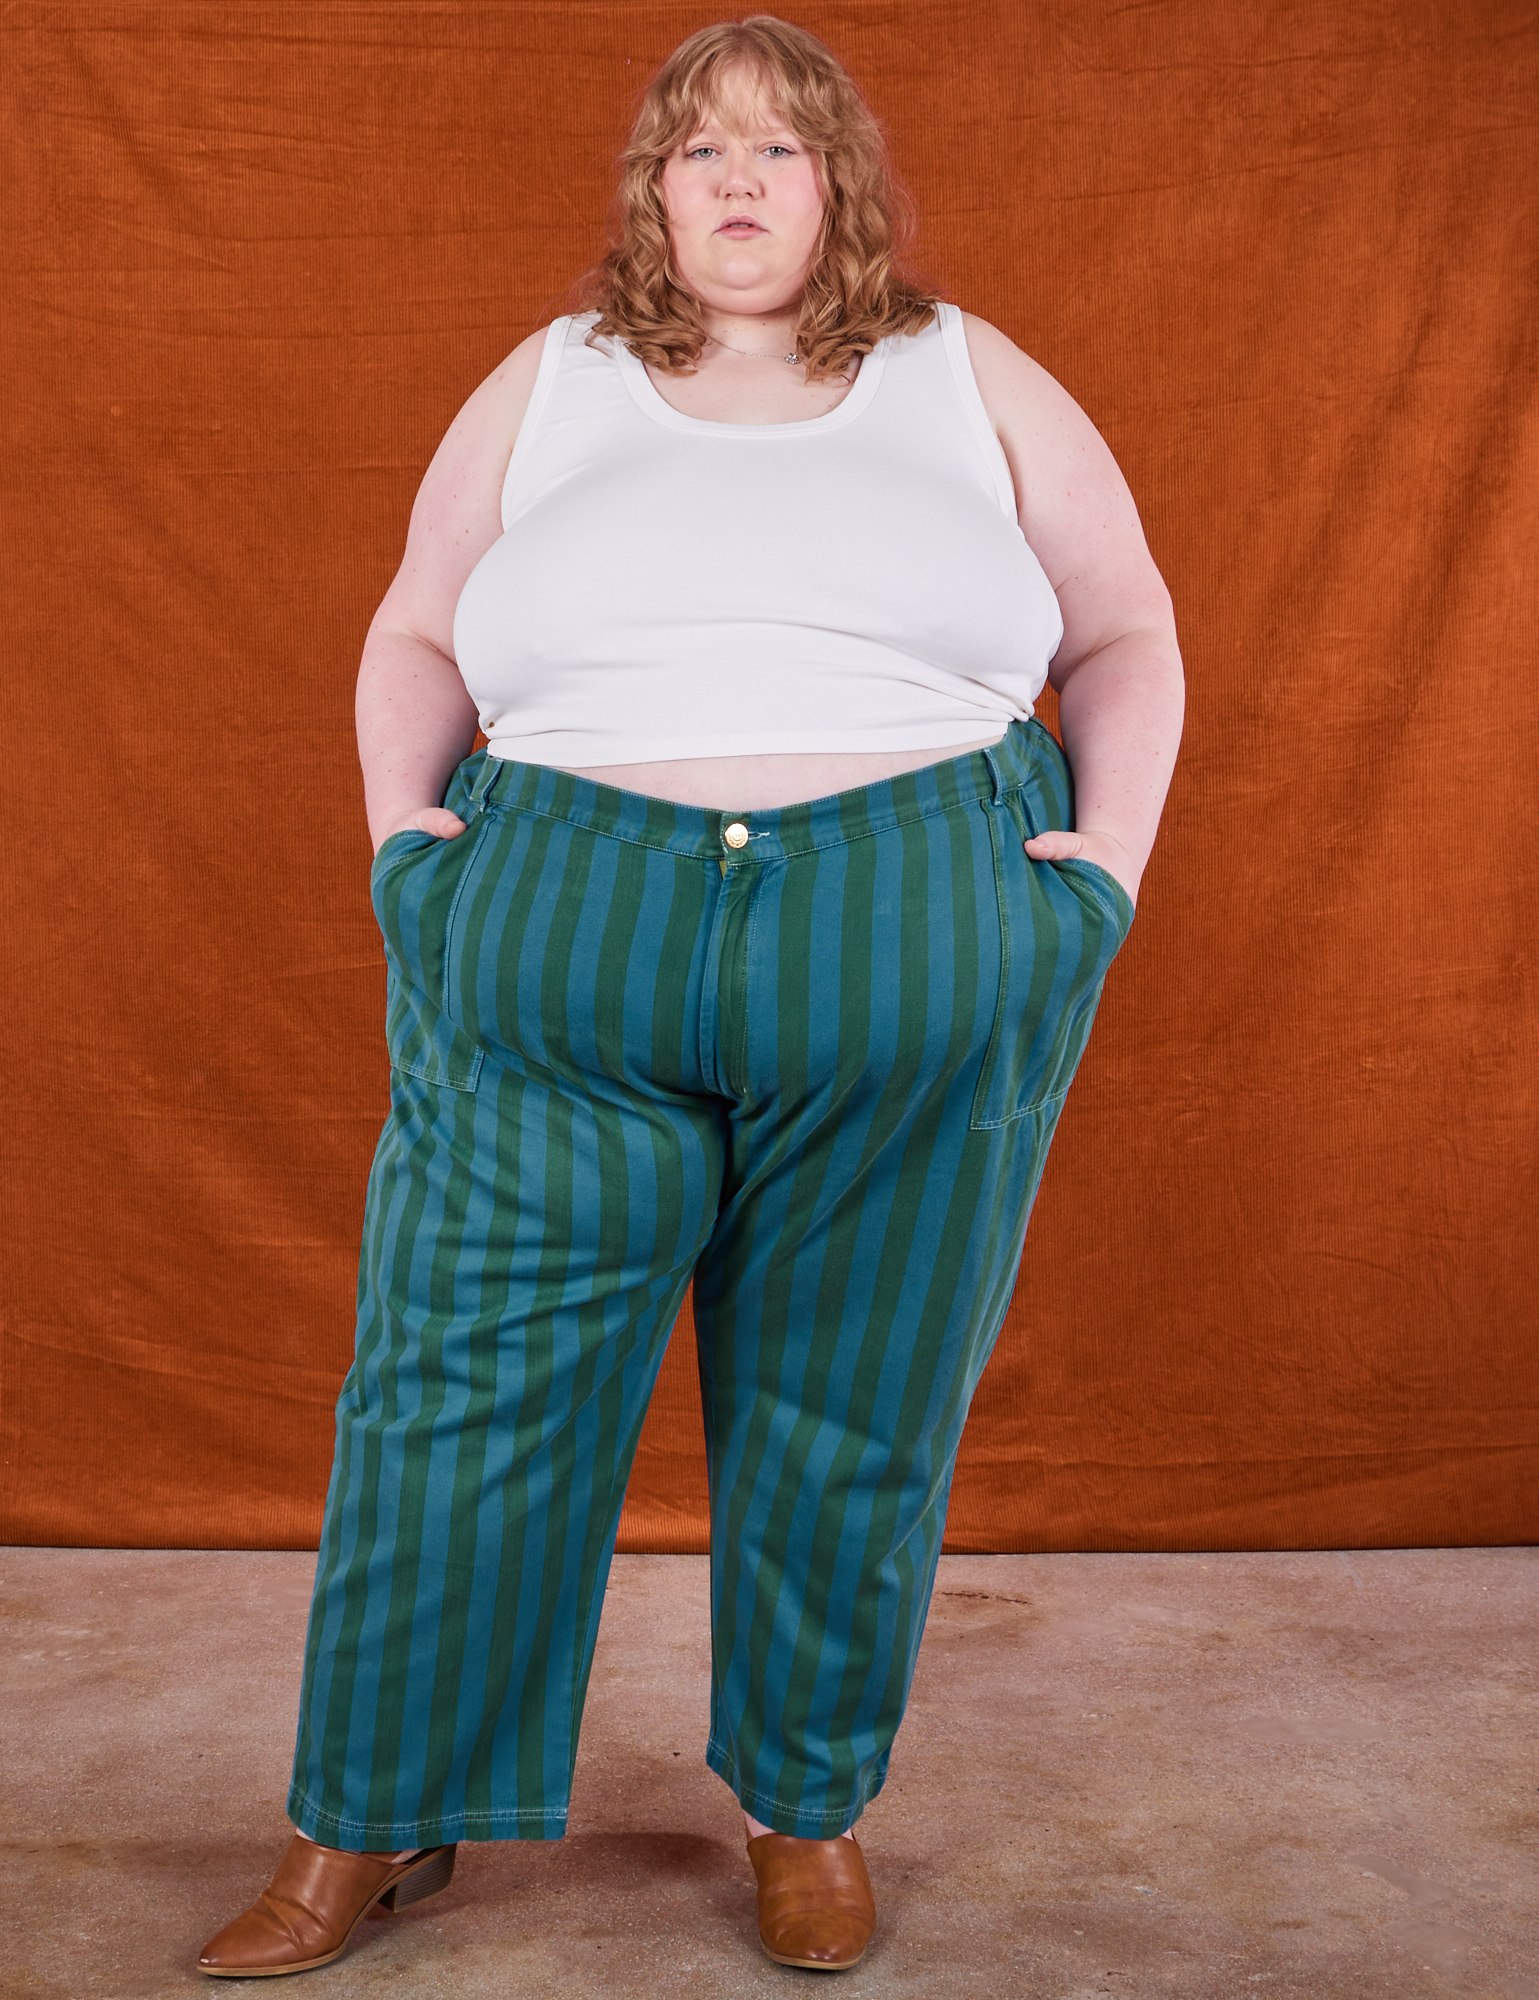 Catie is 5&#39;11&quot; and wearing size 6XL Overdye Stripe Work Pants in Blue/Green paired with vintage off-white Tank Top